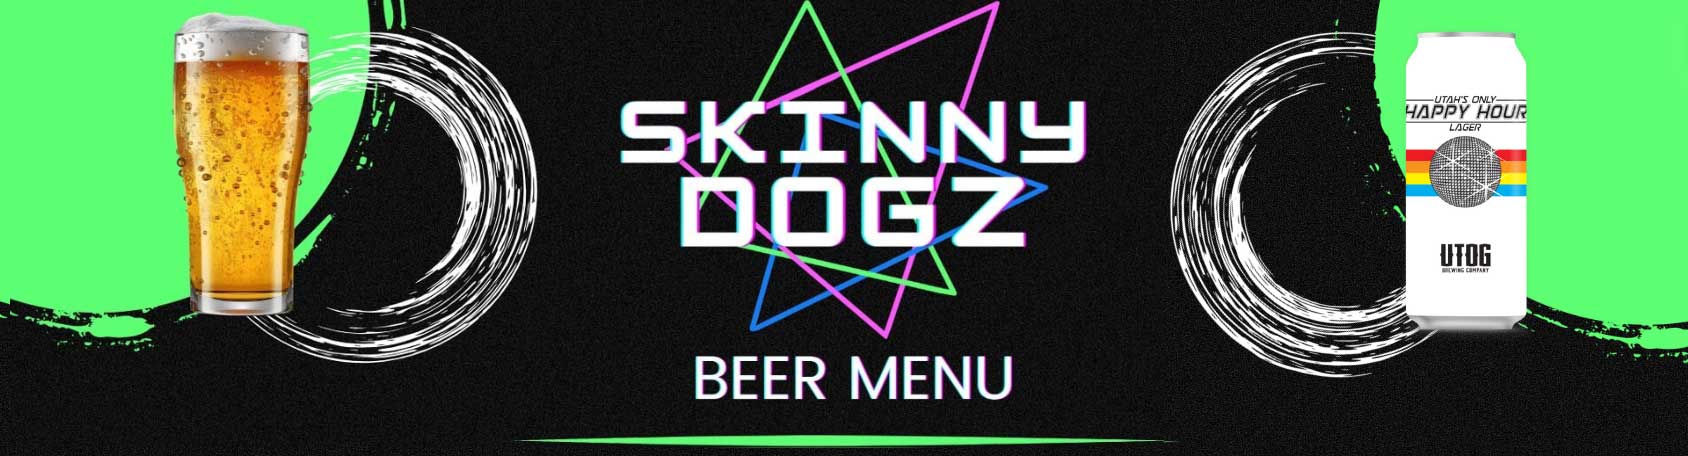 Menu for Skinny Dogz beer, featuring a variety of craft brews and specials.